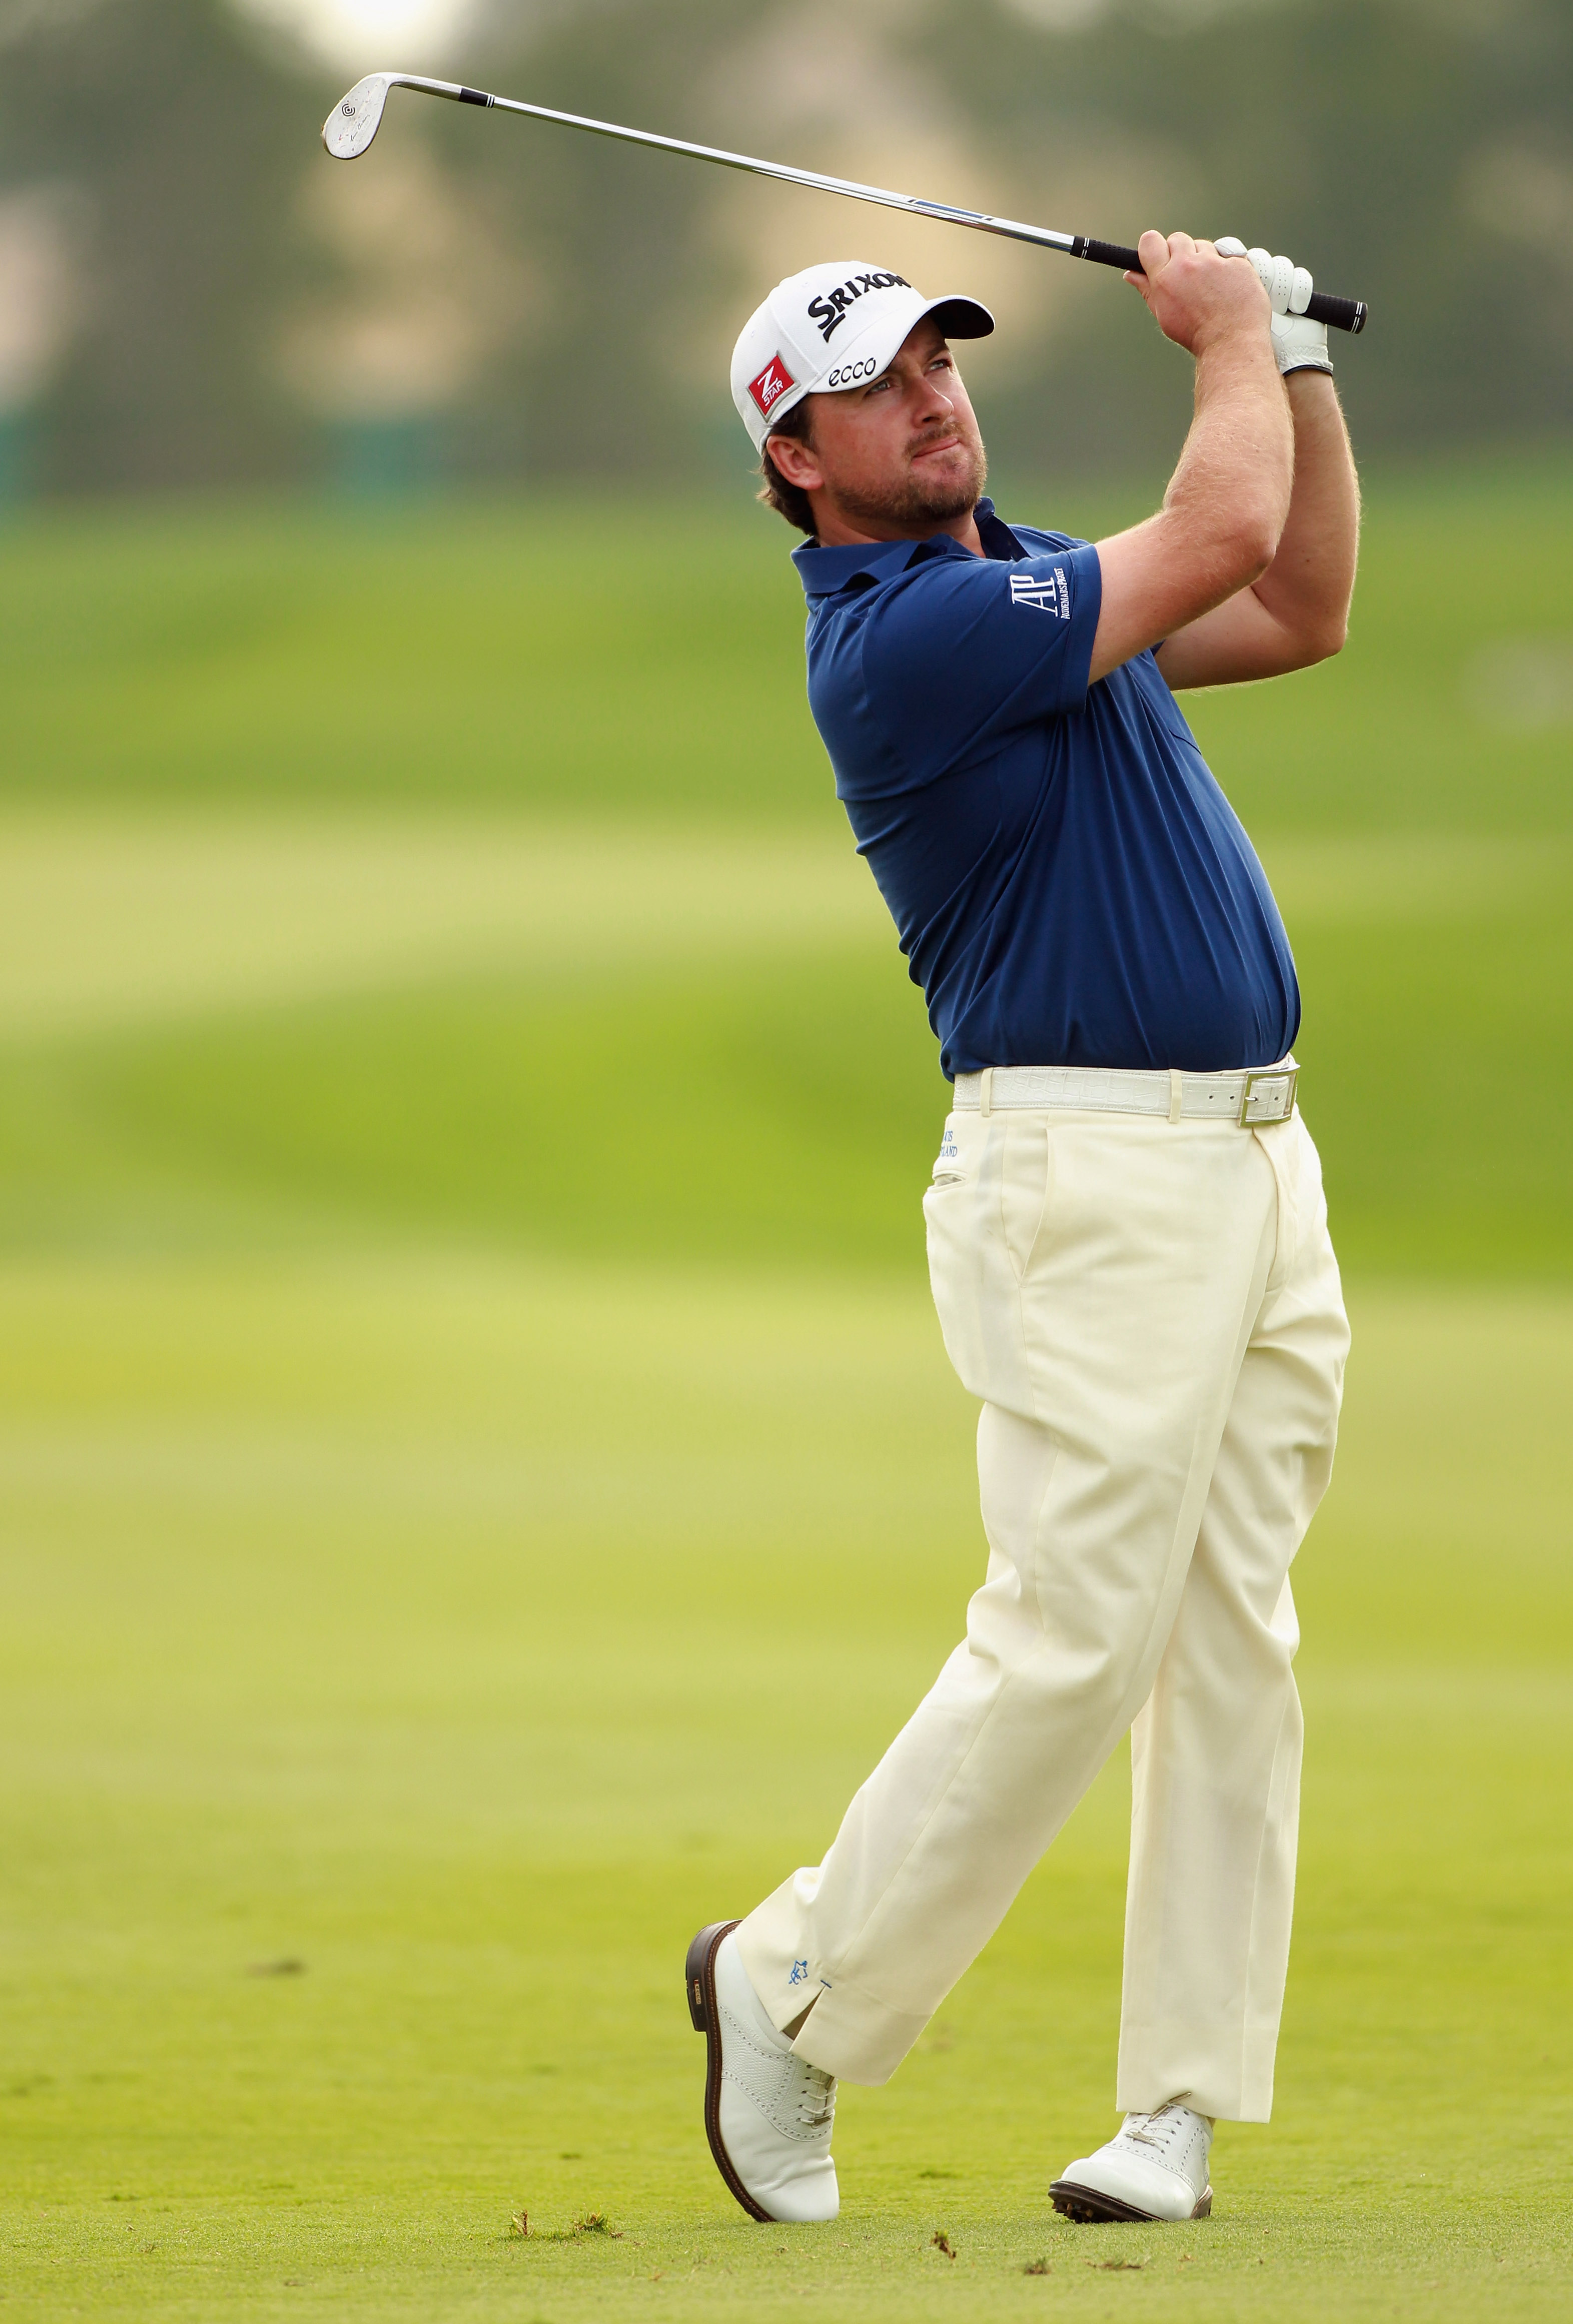 ABU DHABI, UNITED ARAB EMIRATES - JANUARY 22:  Graeme McDowell of Northern Ireland in action during the third round of The Abu Dhabi HSBC Golf Championship at Abu Dhabi Golf Club on January 22, 2011 in Abu Dhabi, United Arab Emirates.  (Photo by Andrew Re